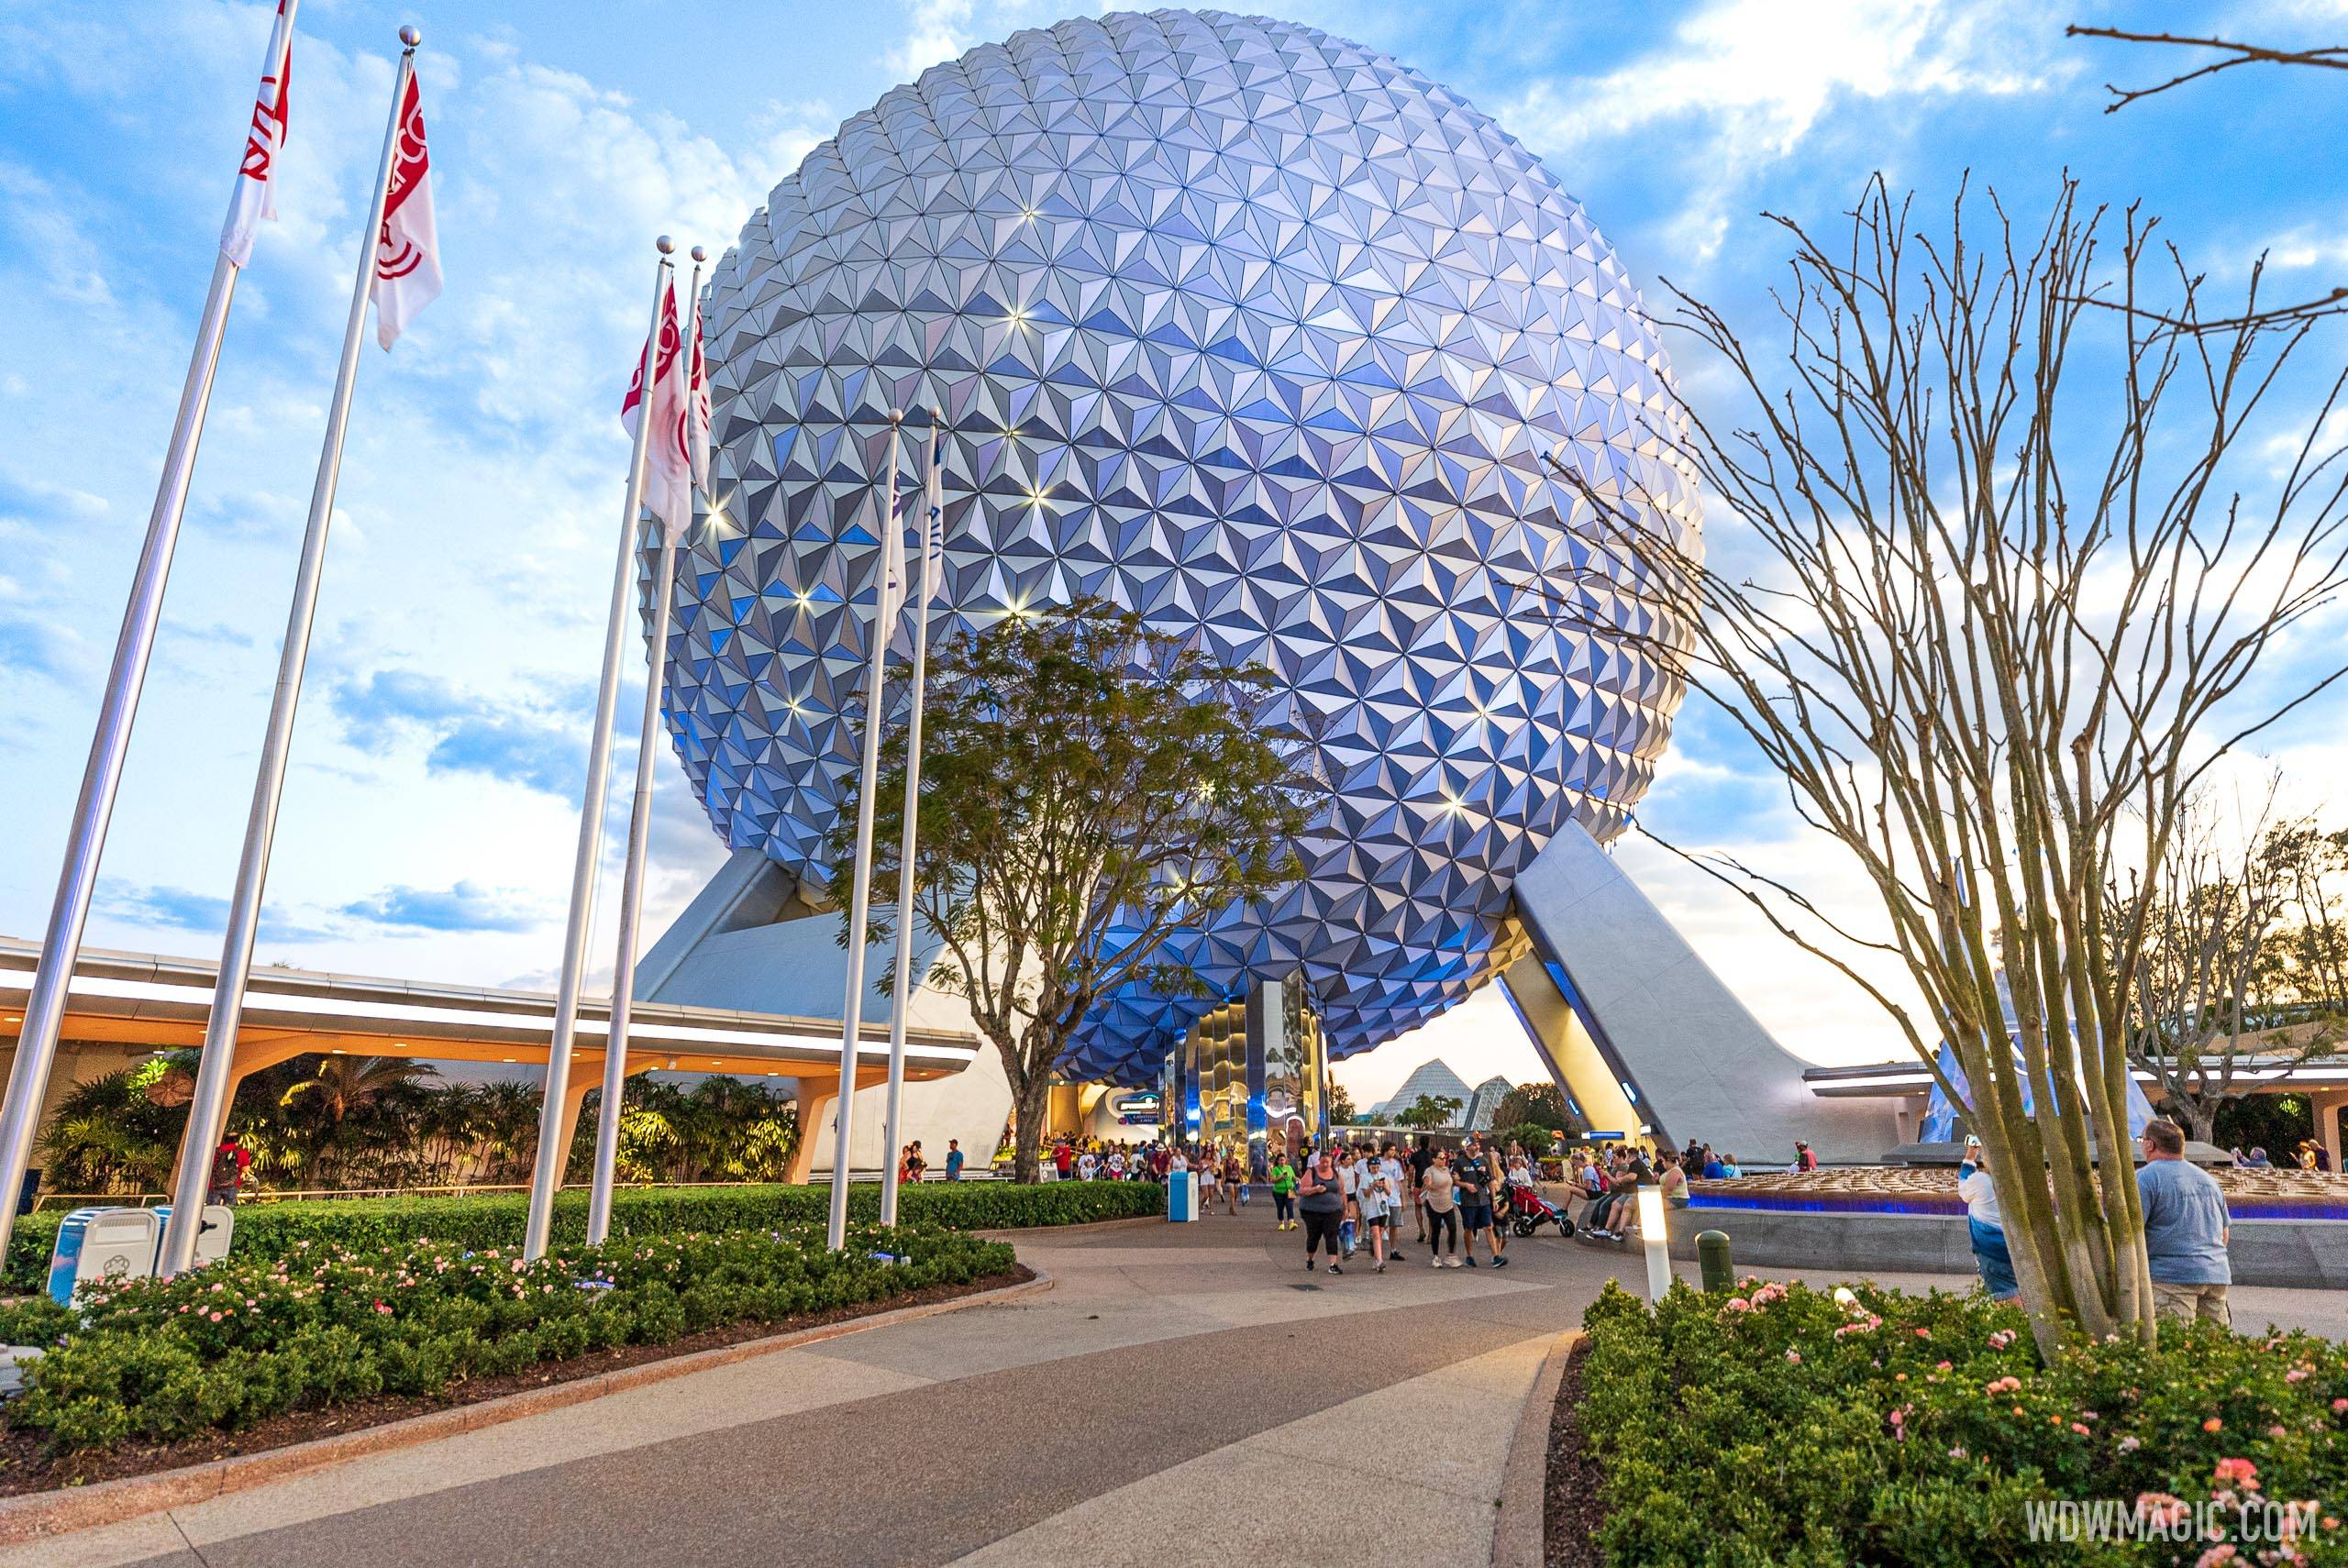 Changes coming to Epcot's musical act line-up